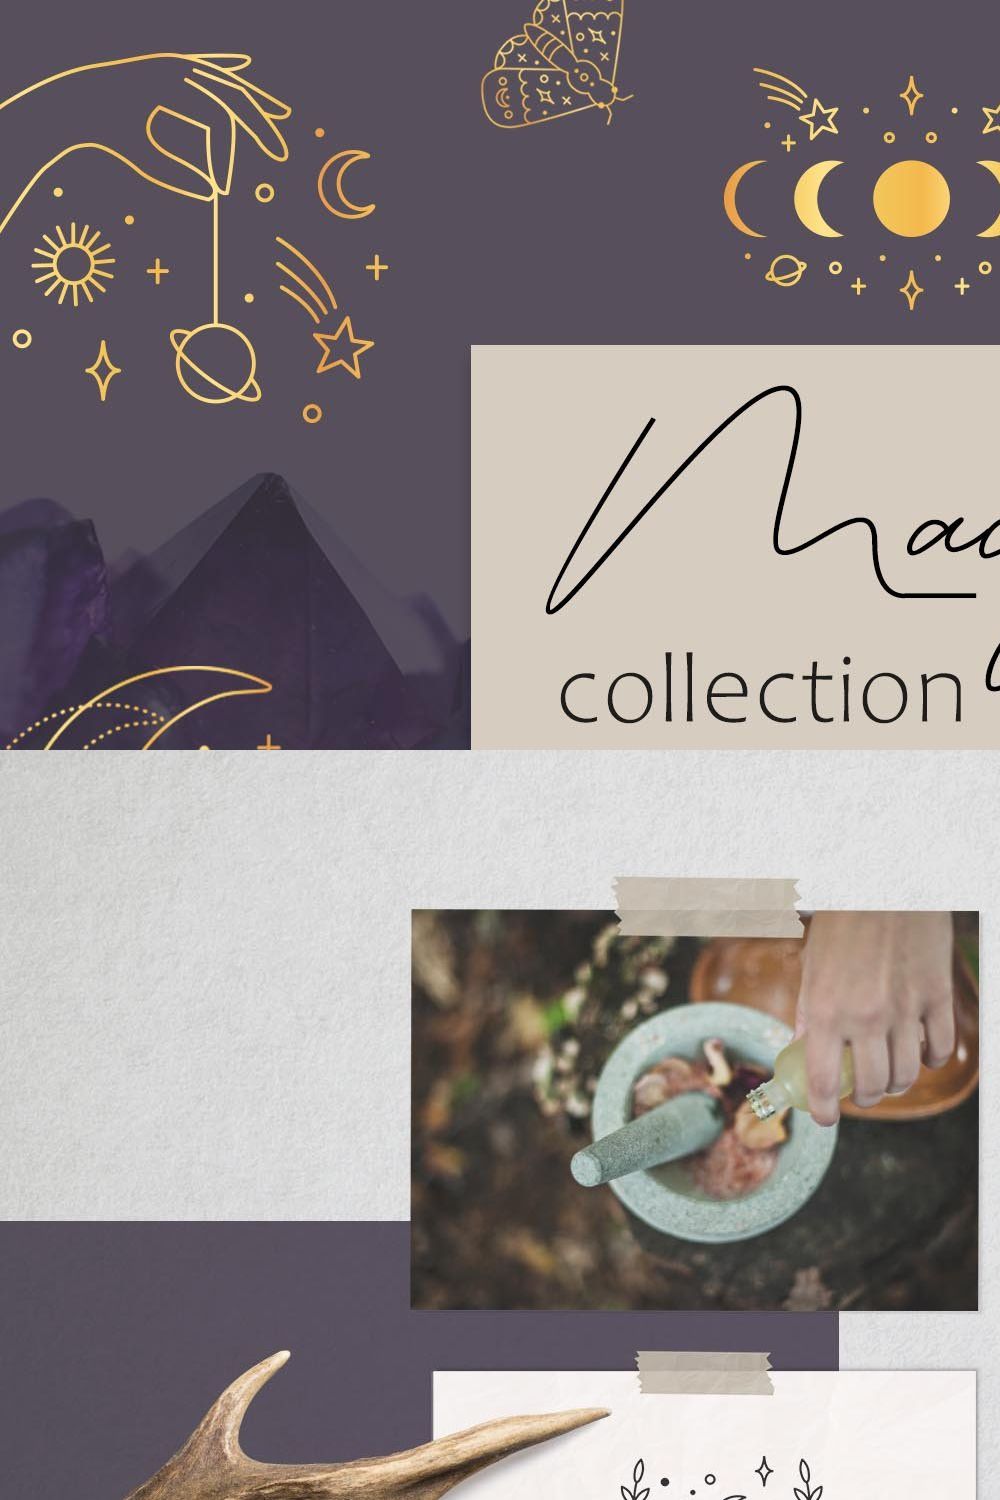 Magic collection pinterest preview image.